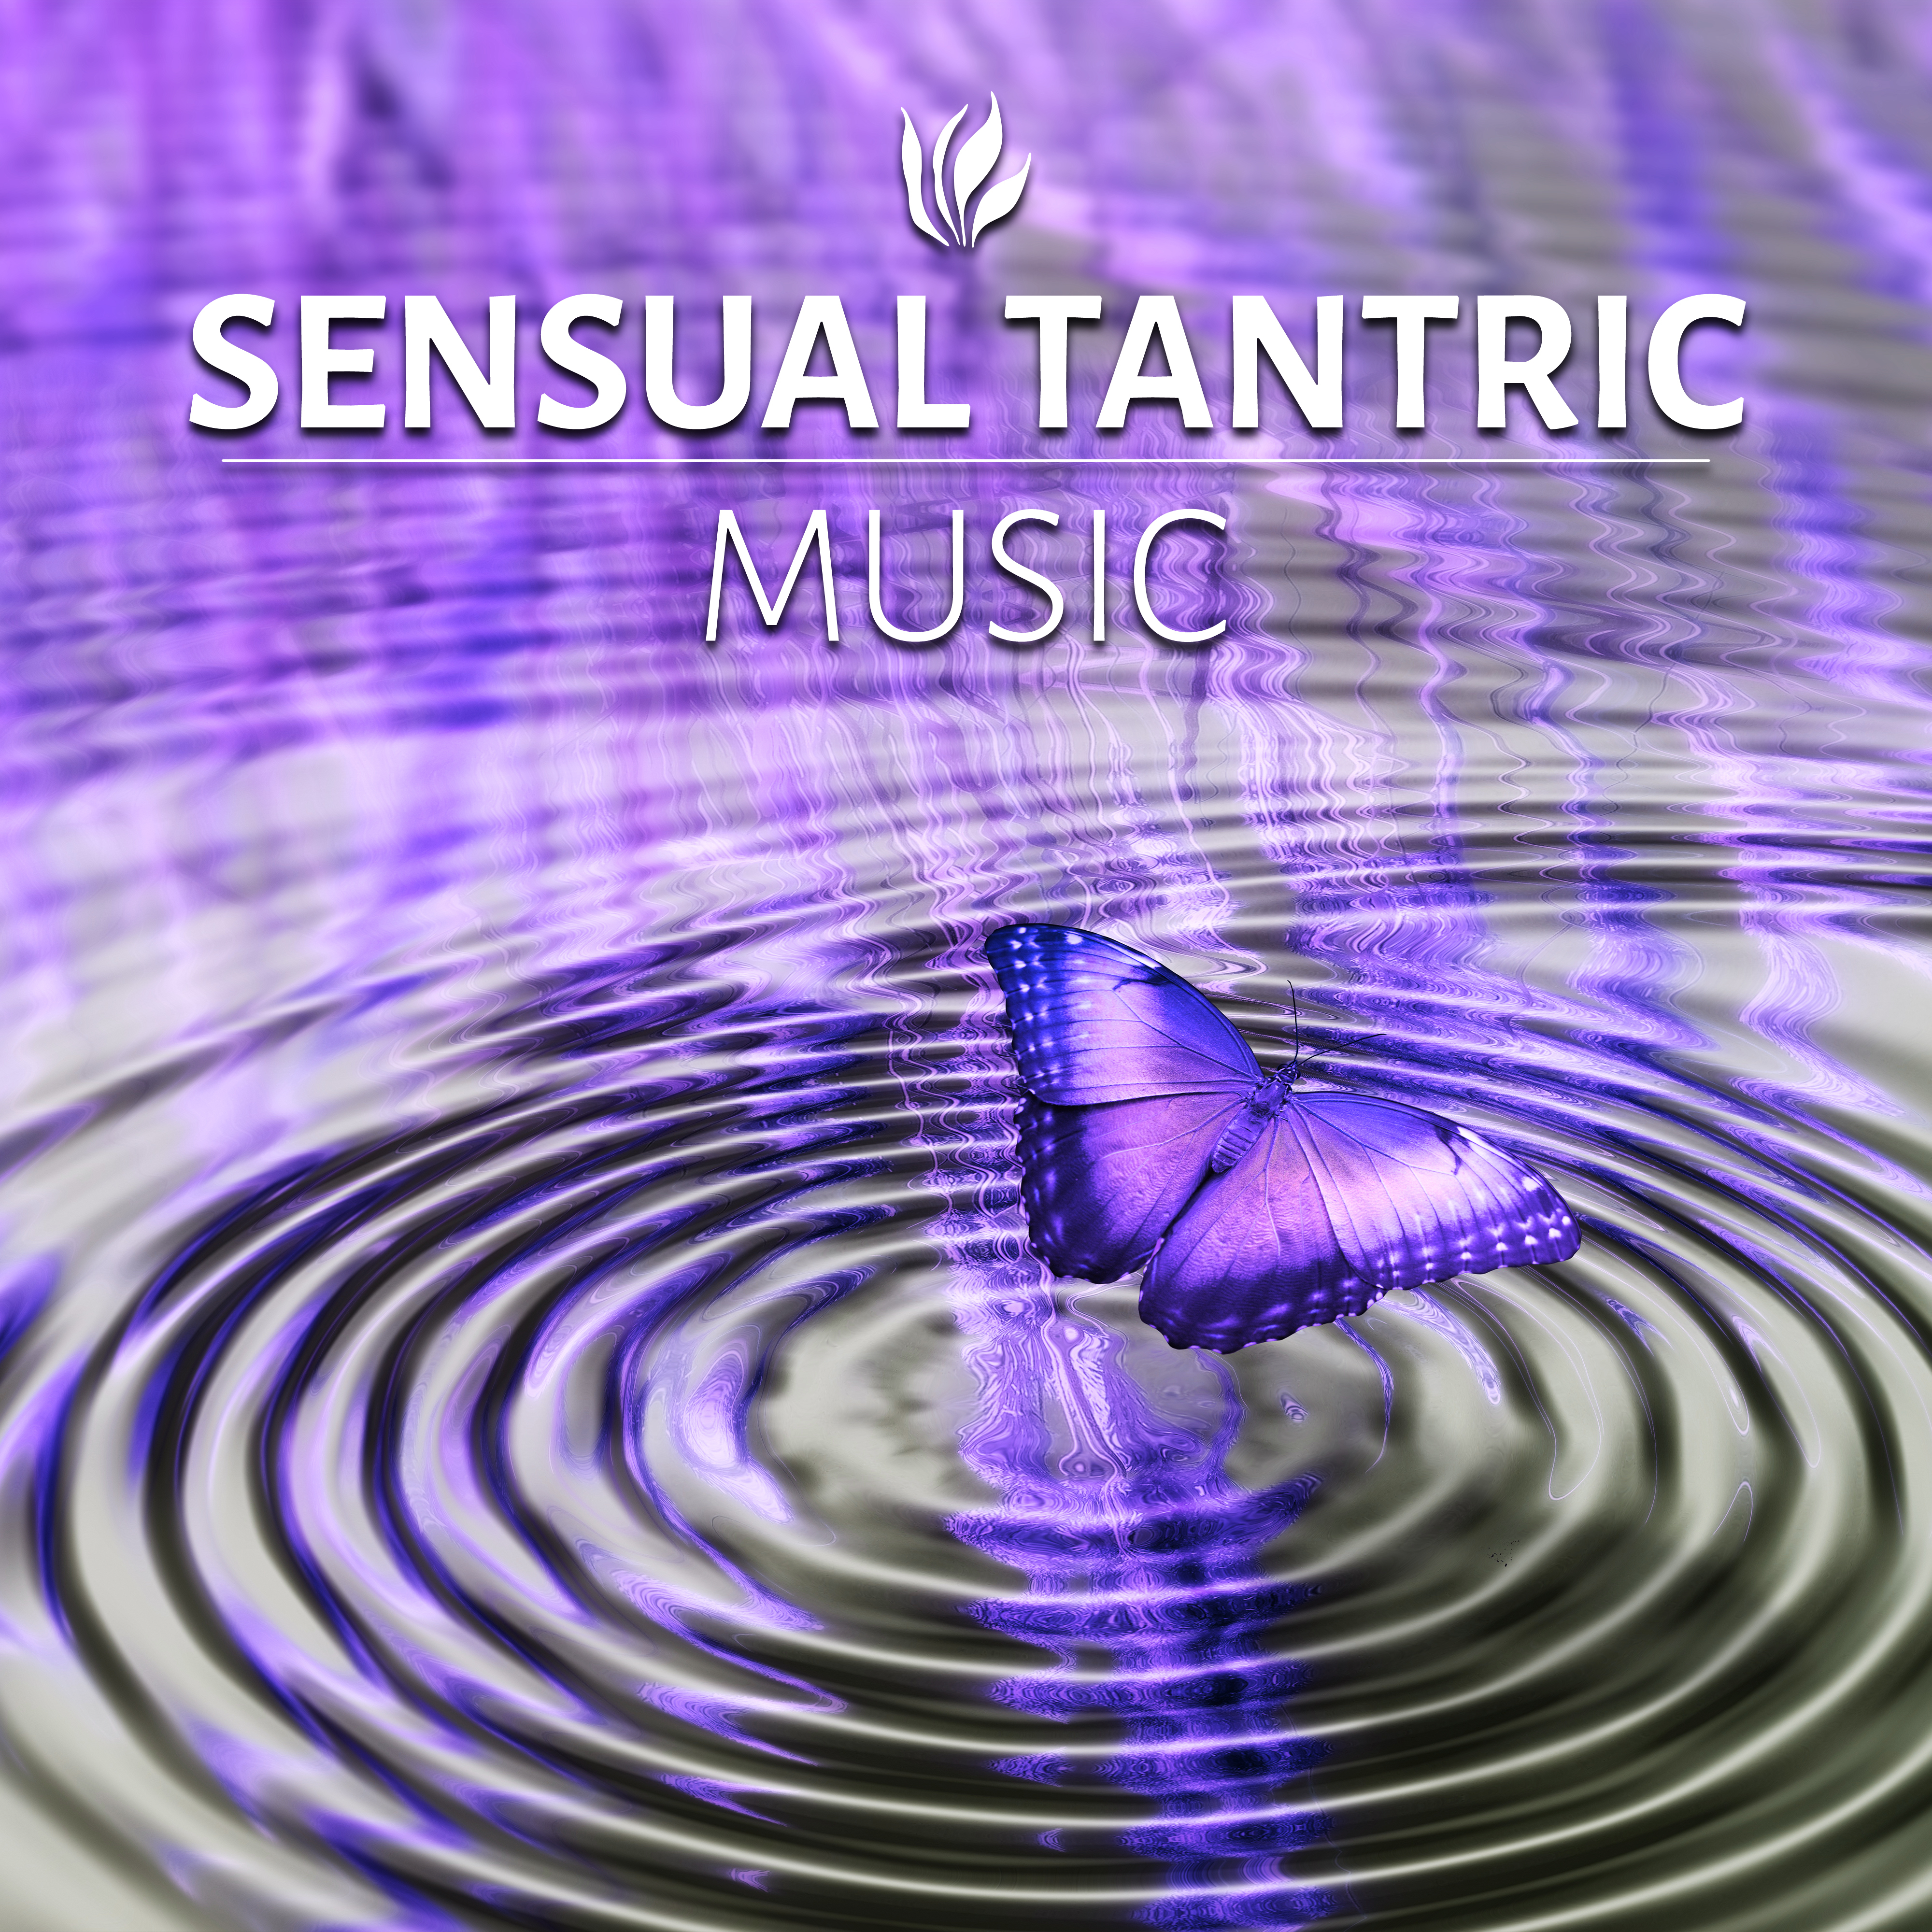 Sensual Tantric Music - Ocean Waves, Tantra Music for Meditation and Relaxation, Tantric Sensual Meditation Music for ***